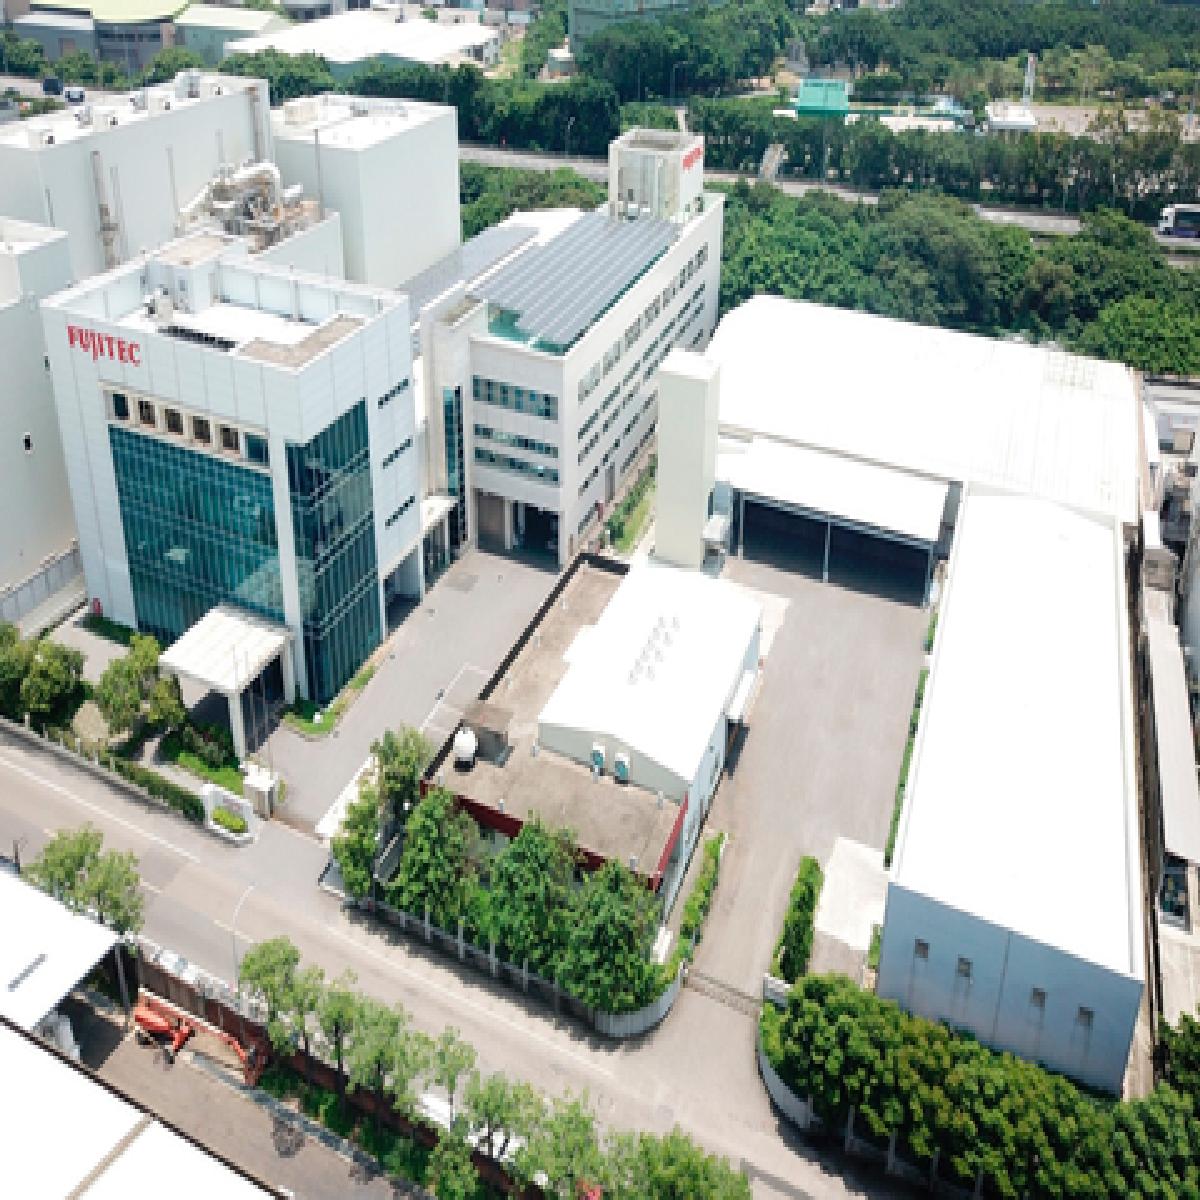 Fujitec Completes Facility Expansion at Elevator Plant in Taiwan